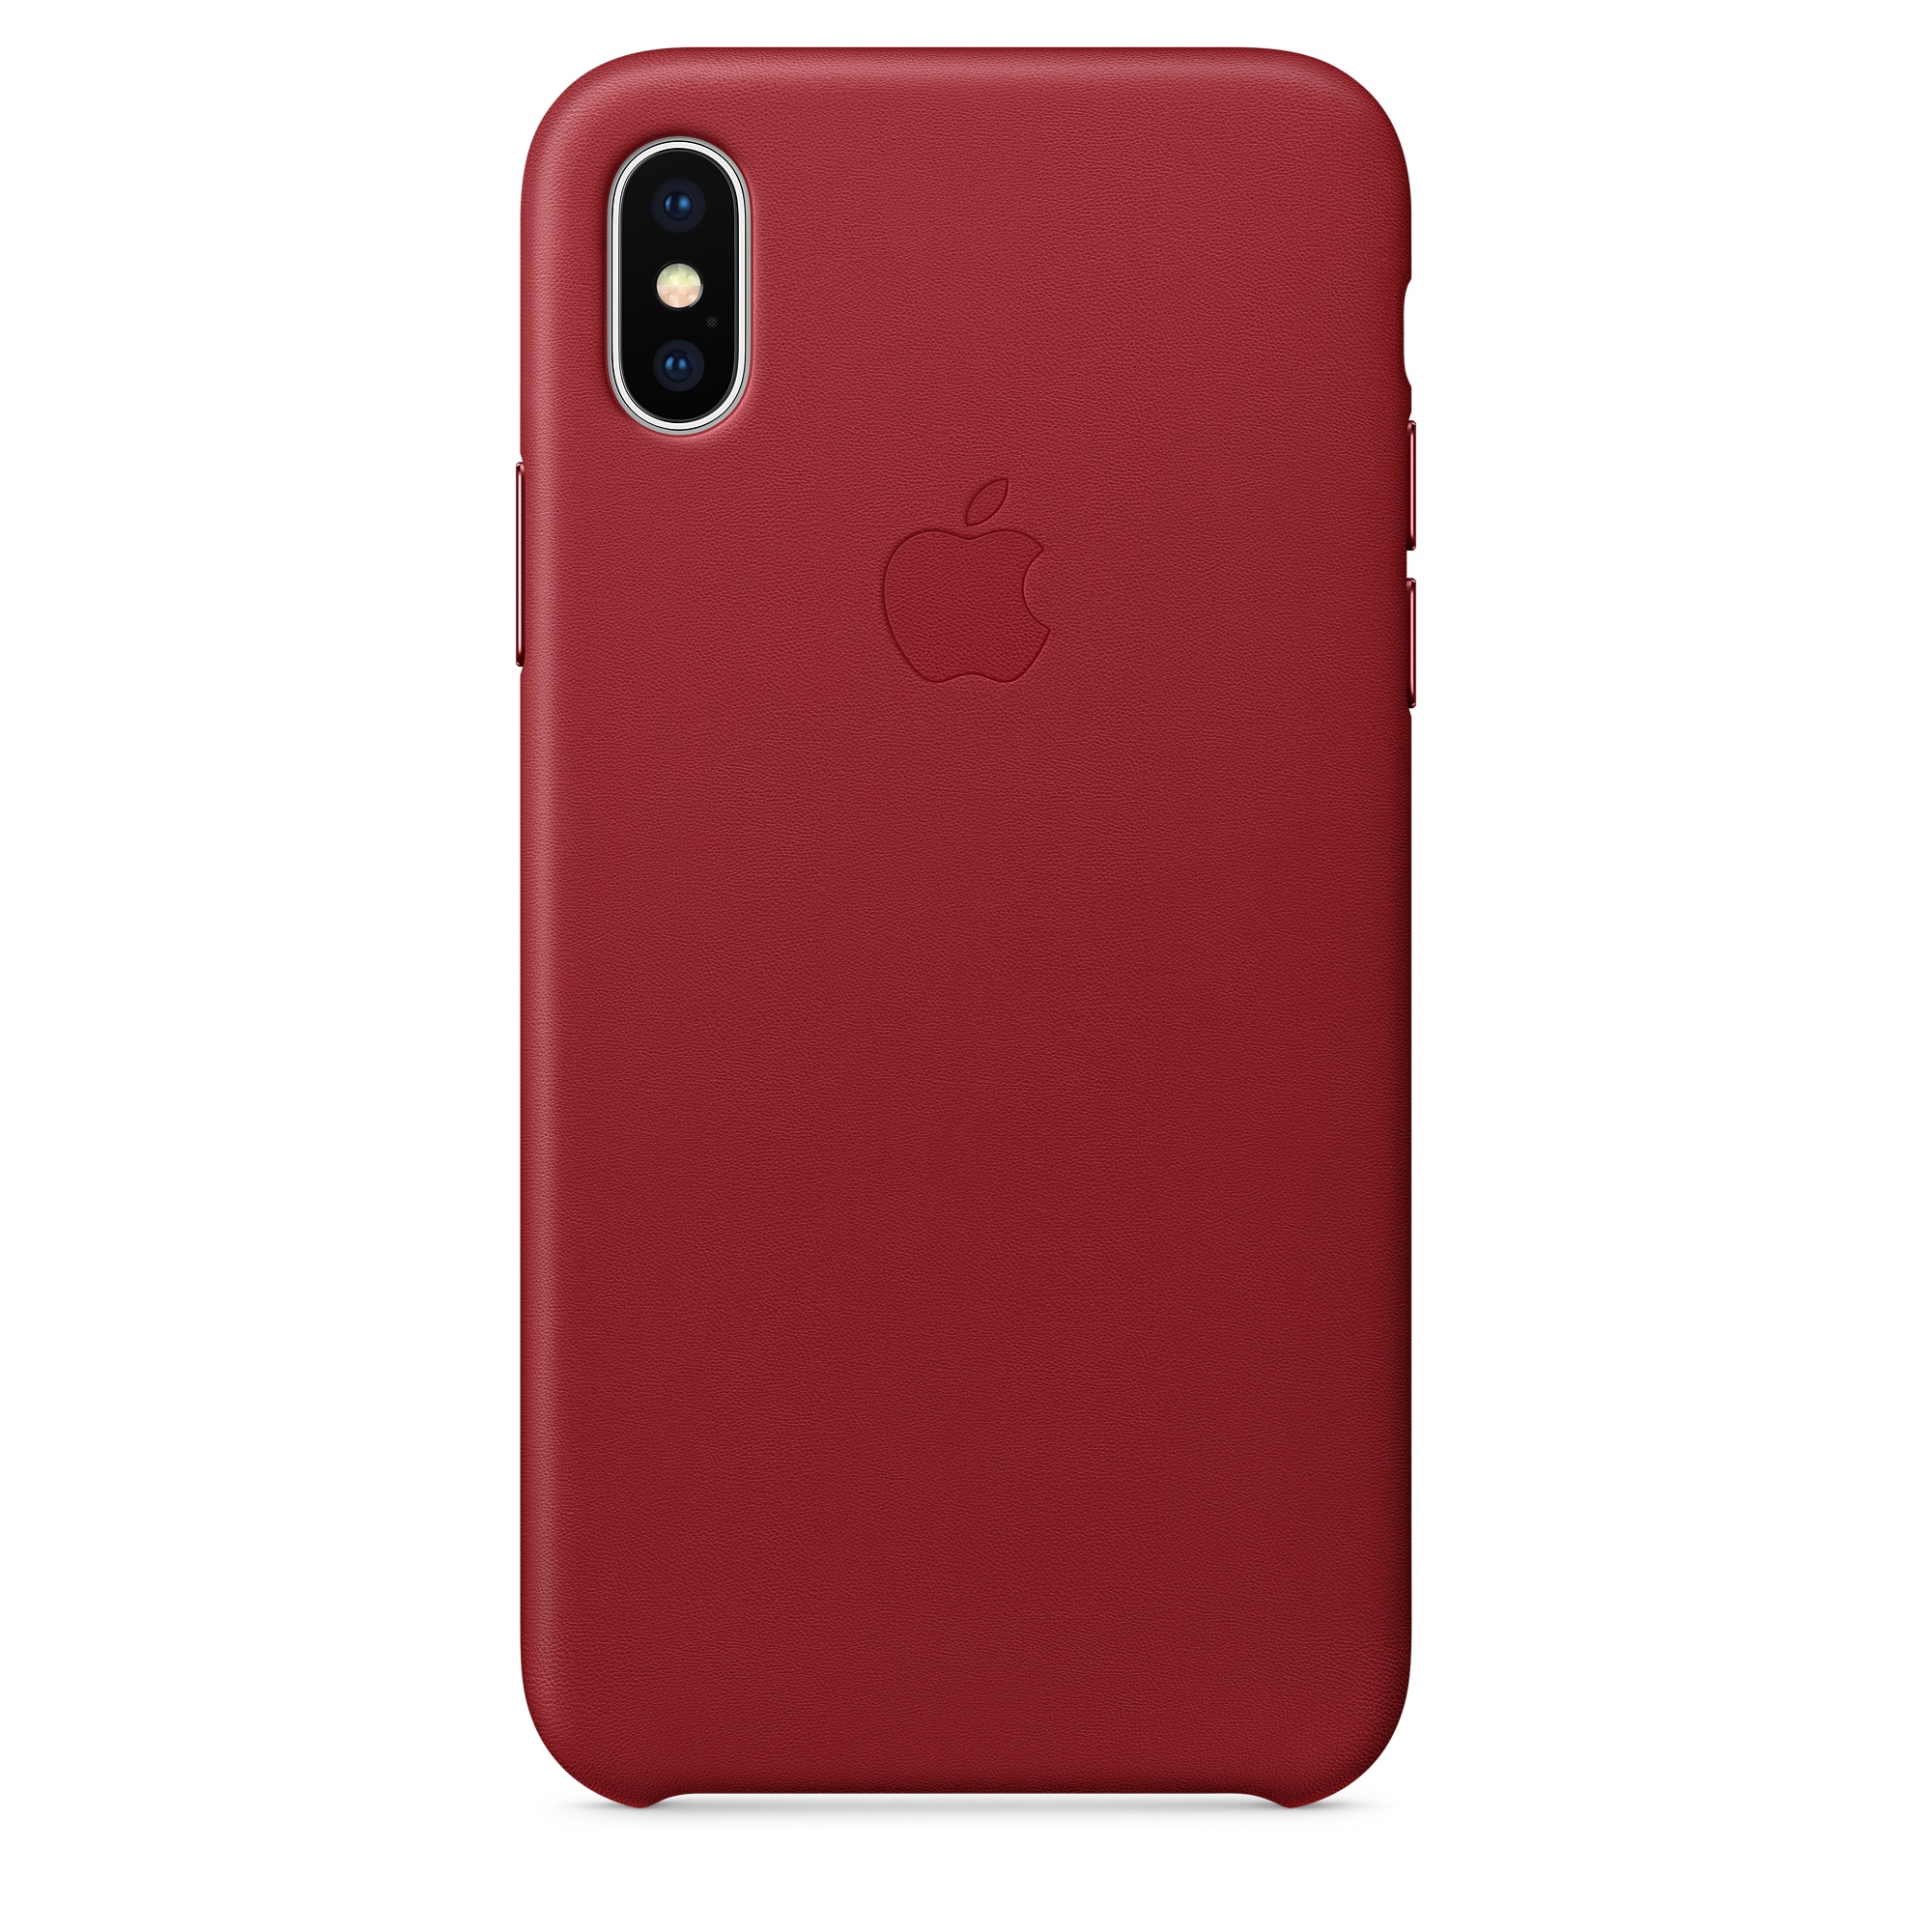 iPhone X Leather Case - (PRODUCT)RED - Apple